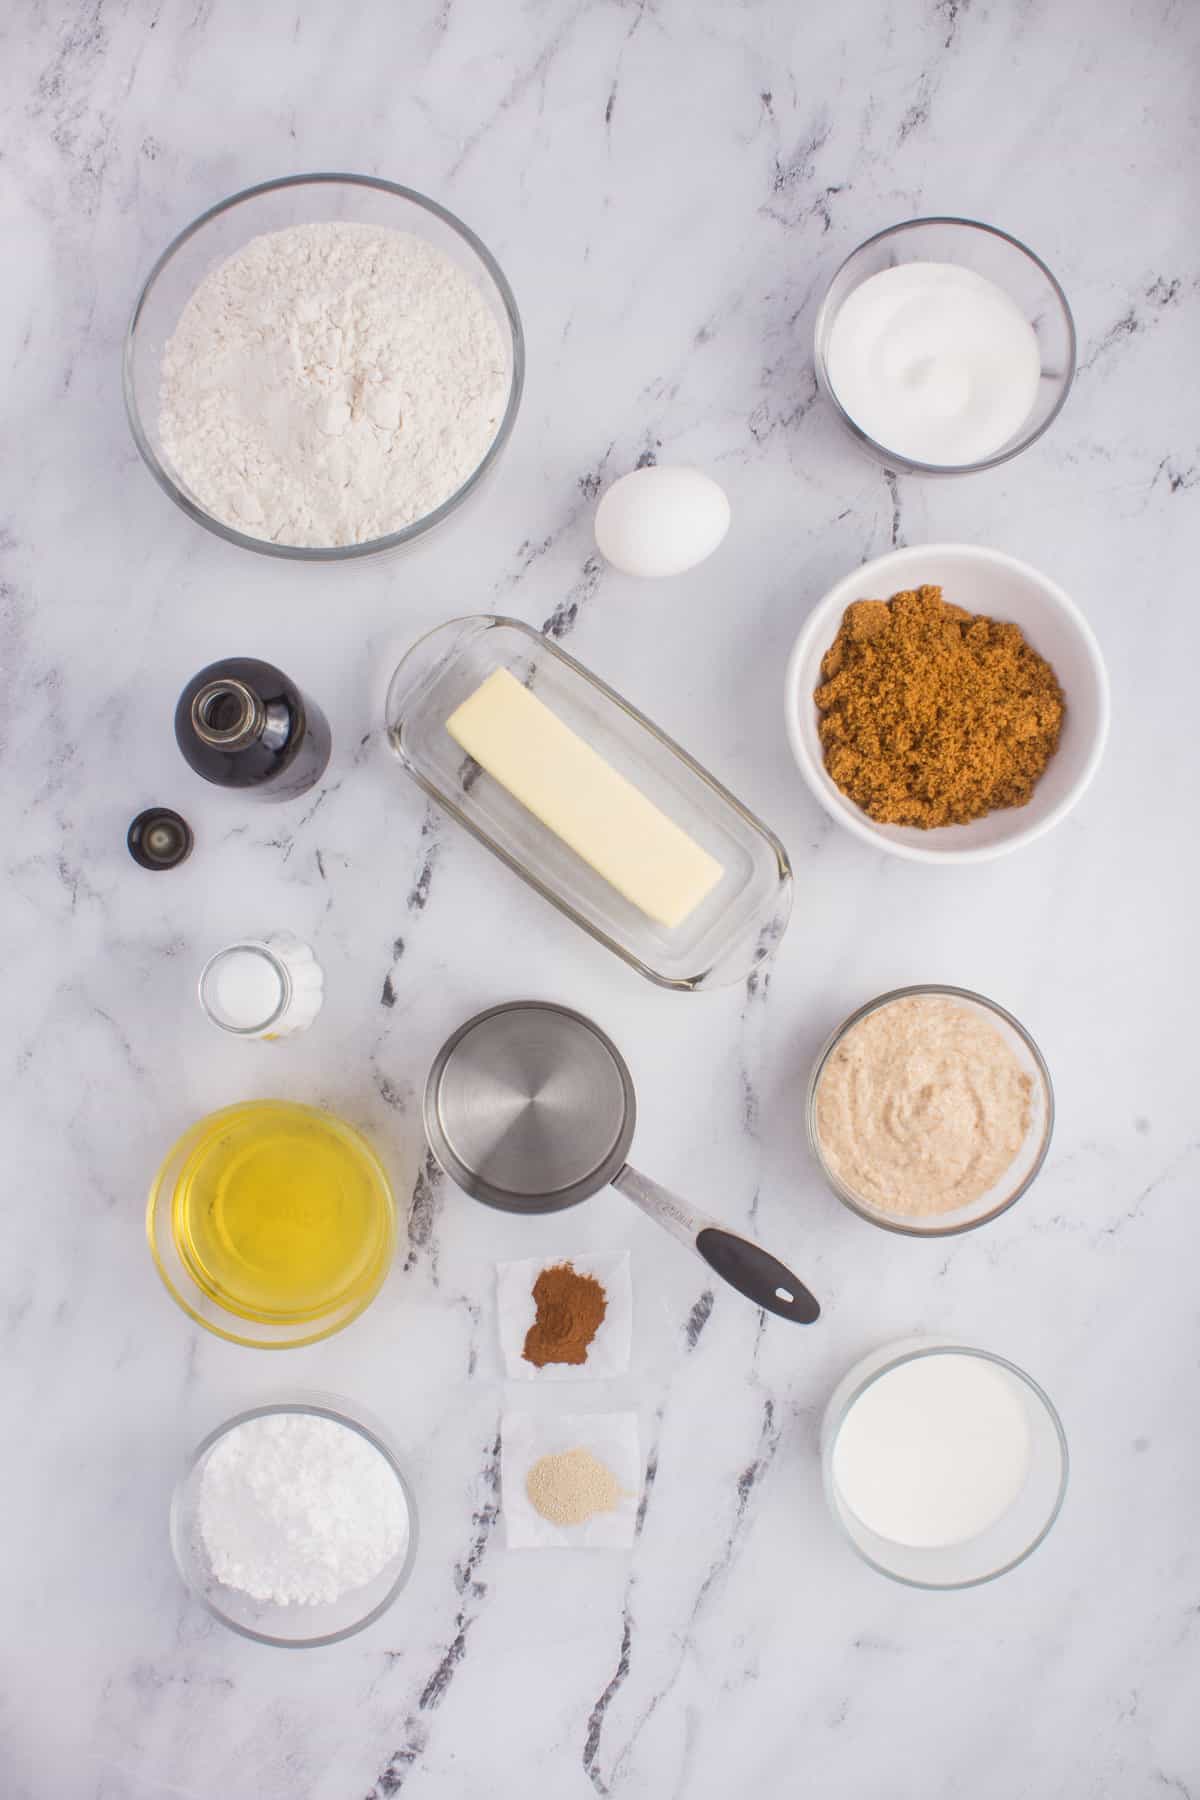 ingredients to make cinnamon buns with a sourdough starter